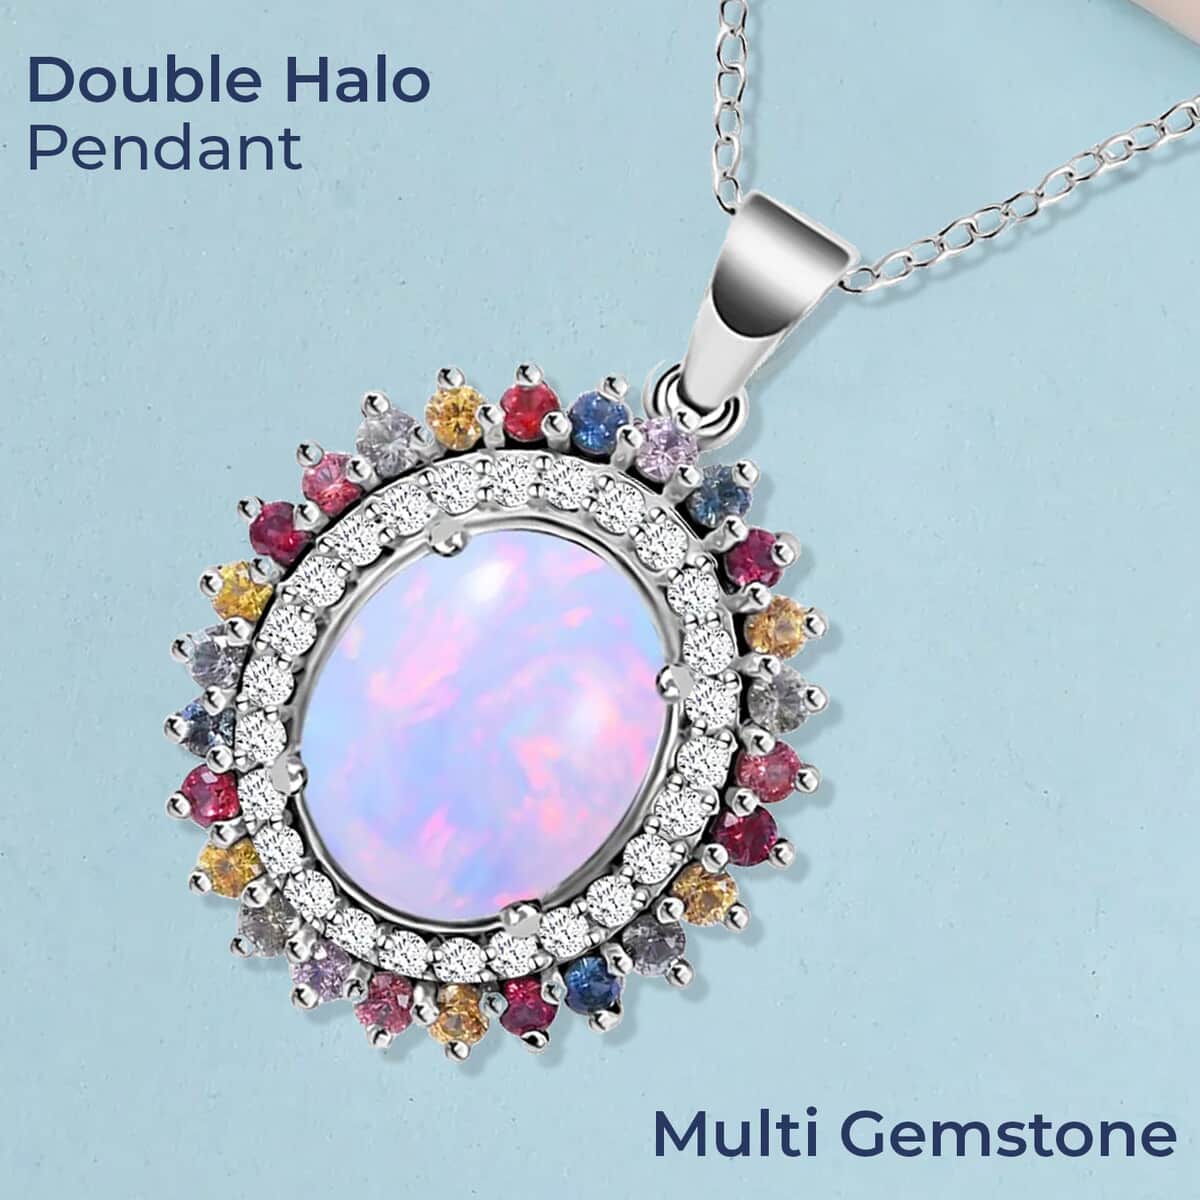 Premium Ethiopian Welo Opal and Multi Gemstone 4.35 ctw Pendant Necklace, Accent Pendant Necklace, Double Halo Pendant Necklace, 18 Inch Necklace, Platinum Over Sterling Silver Necklace image number 1